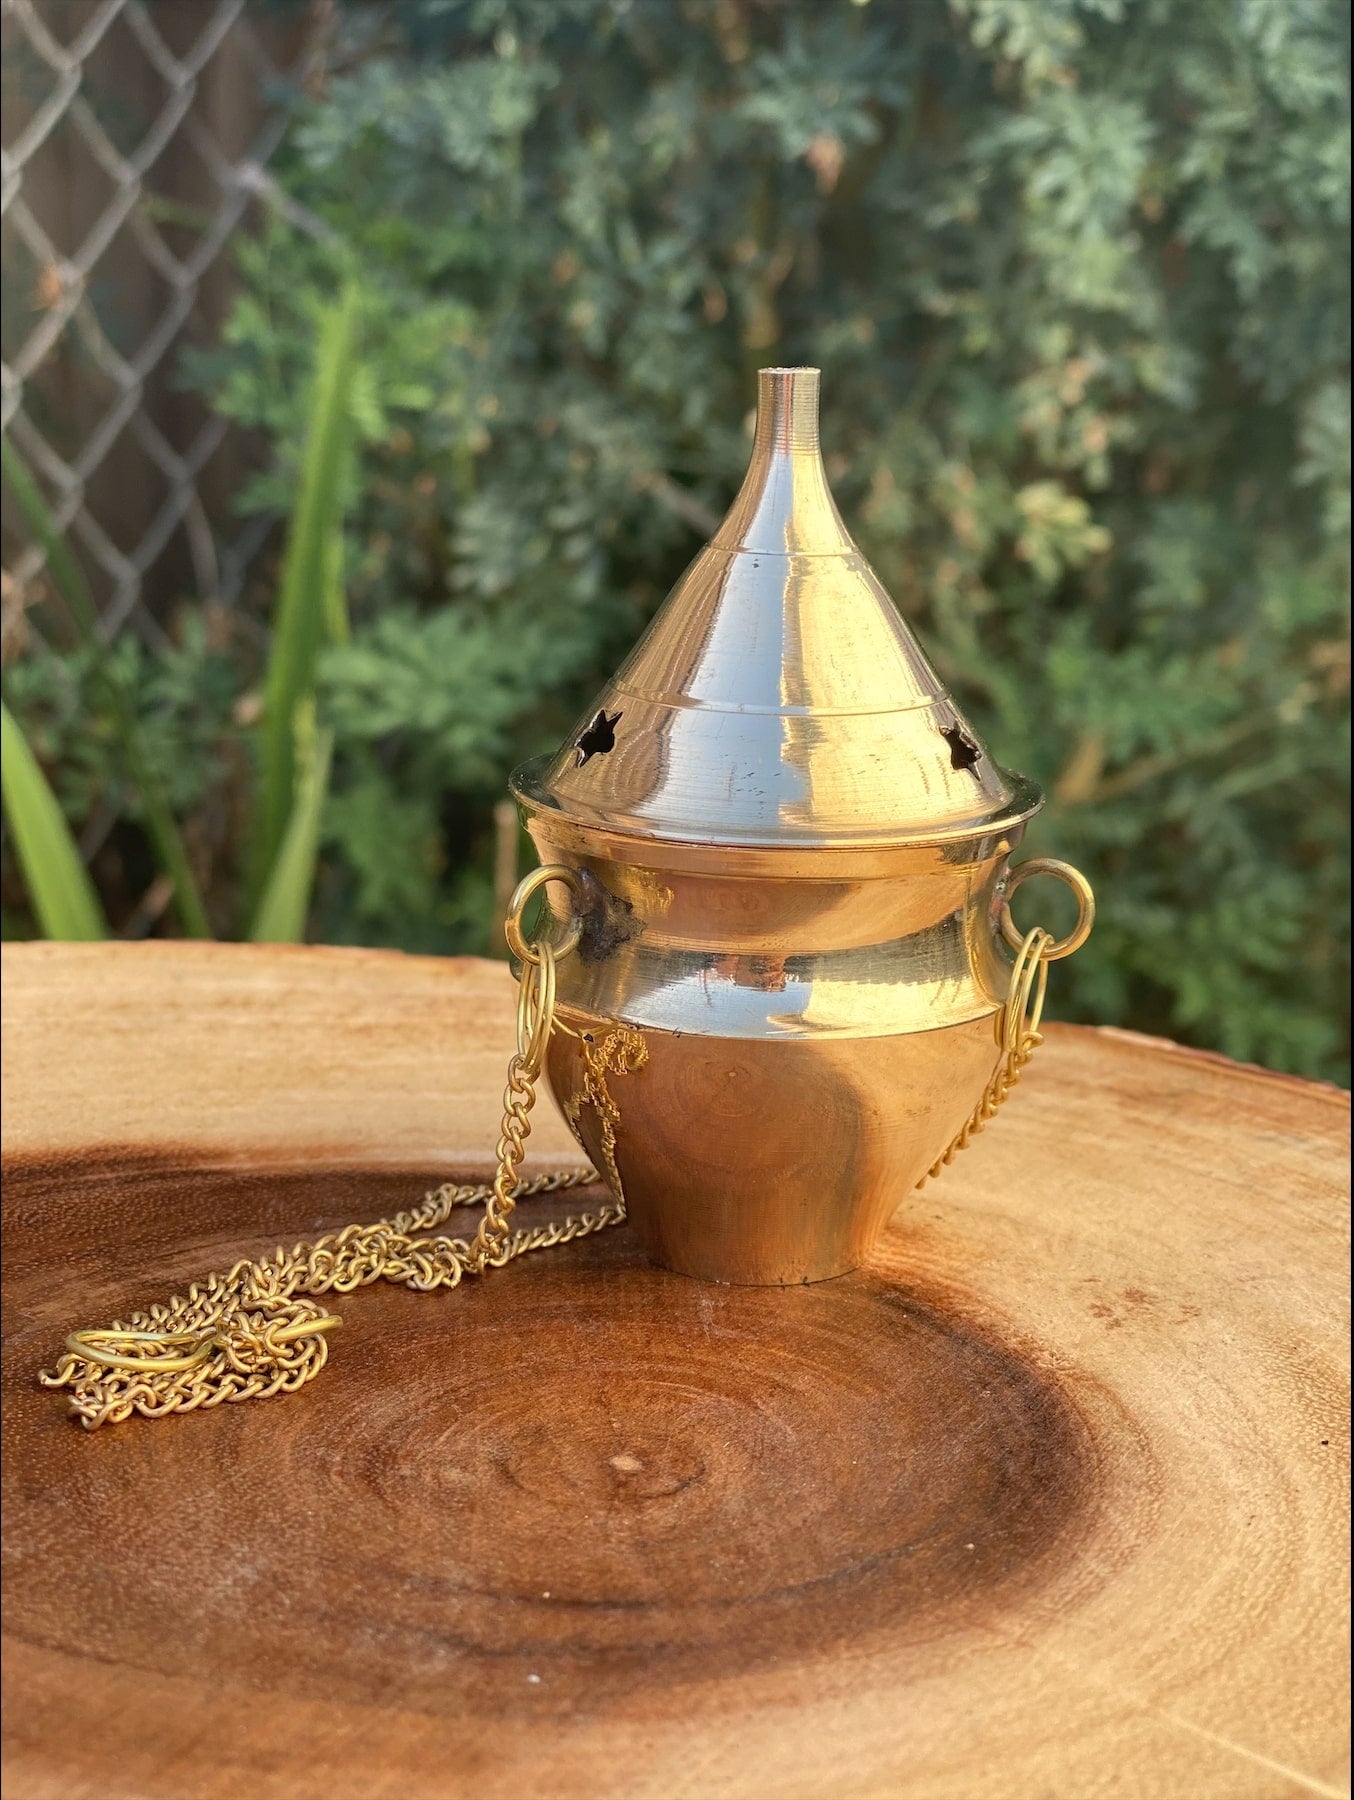 Hanging Brass Charcoal Burner with Stand 3.75"H - Shop Cosmic Healing